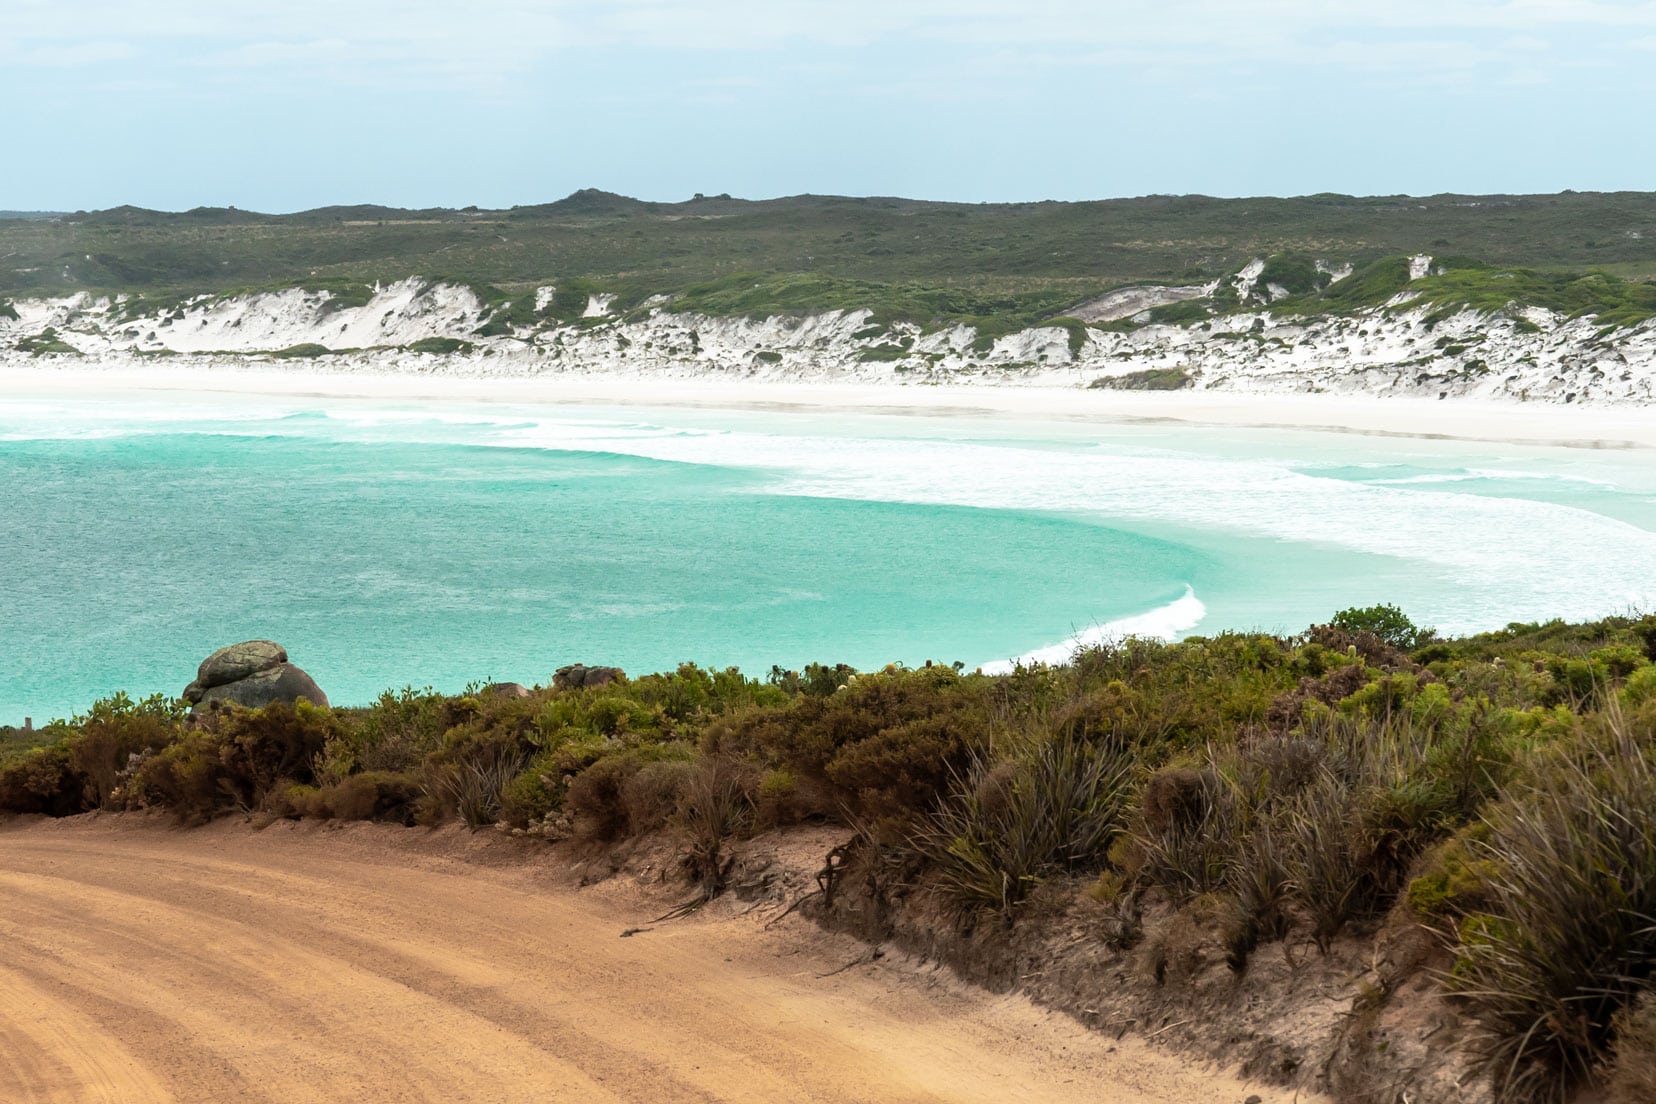 Heading towards Wharton Beach with sandy gravel track on the road and clear turquoise waters and white sandy arched bay